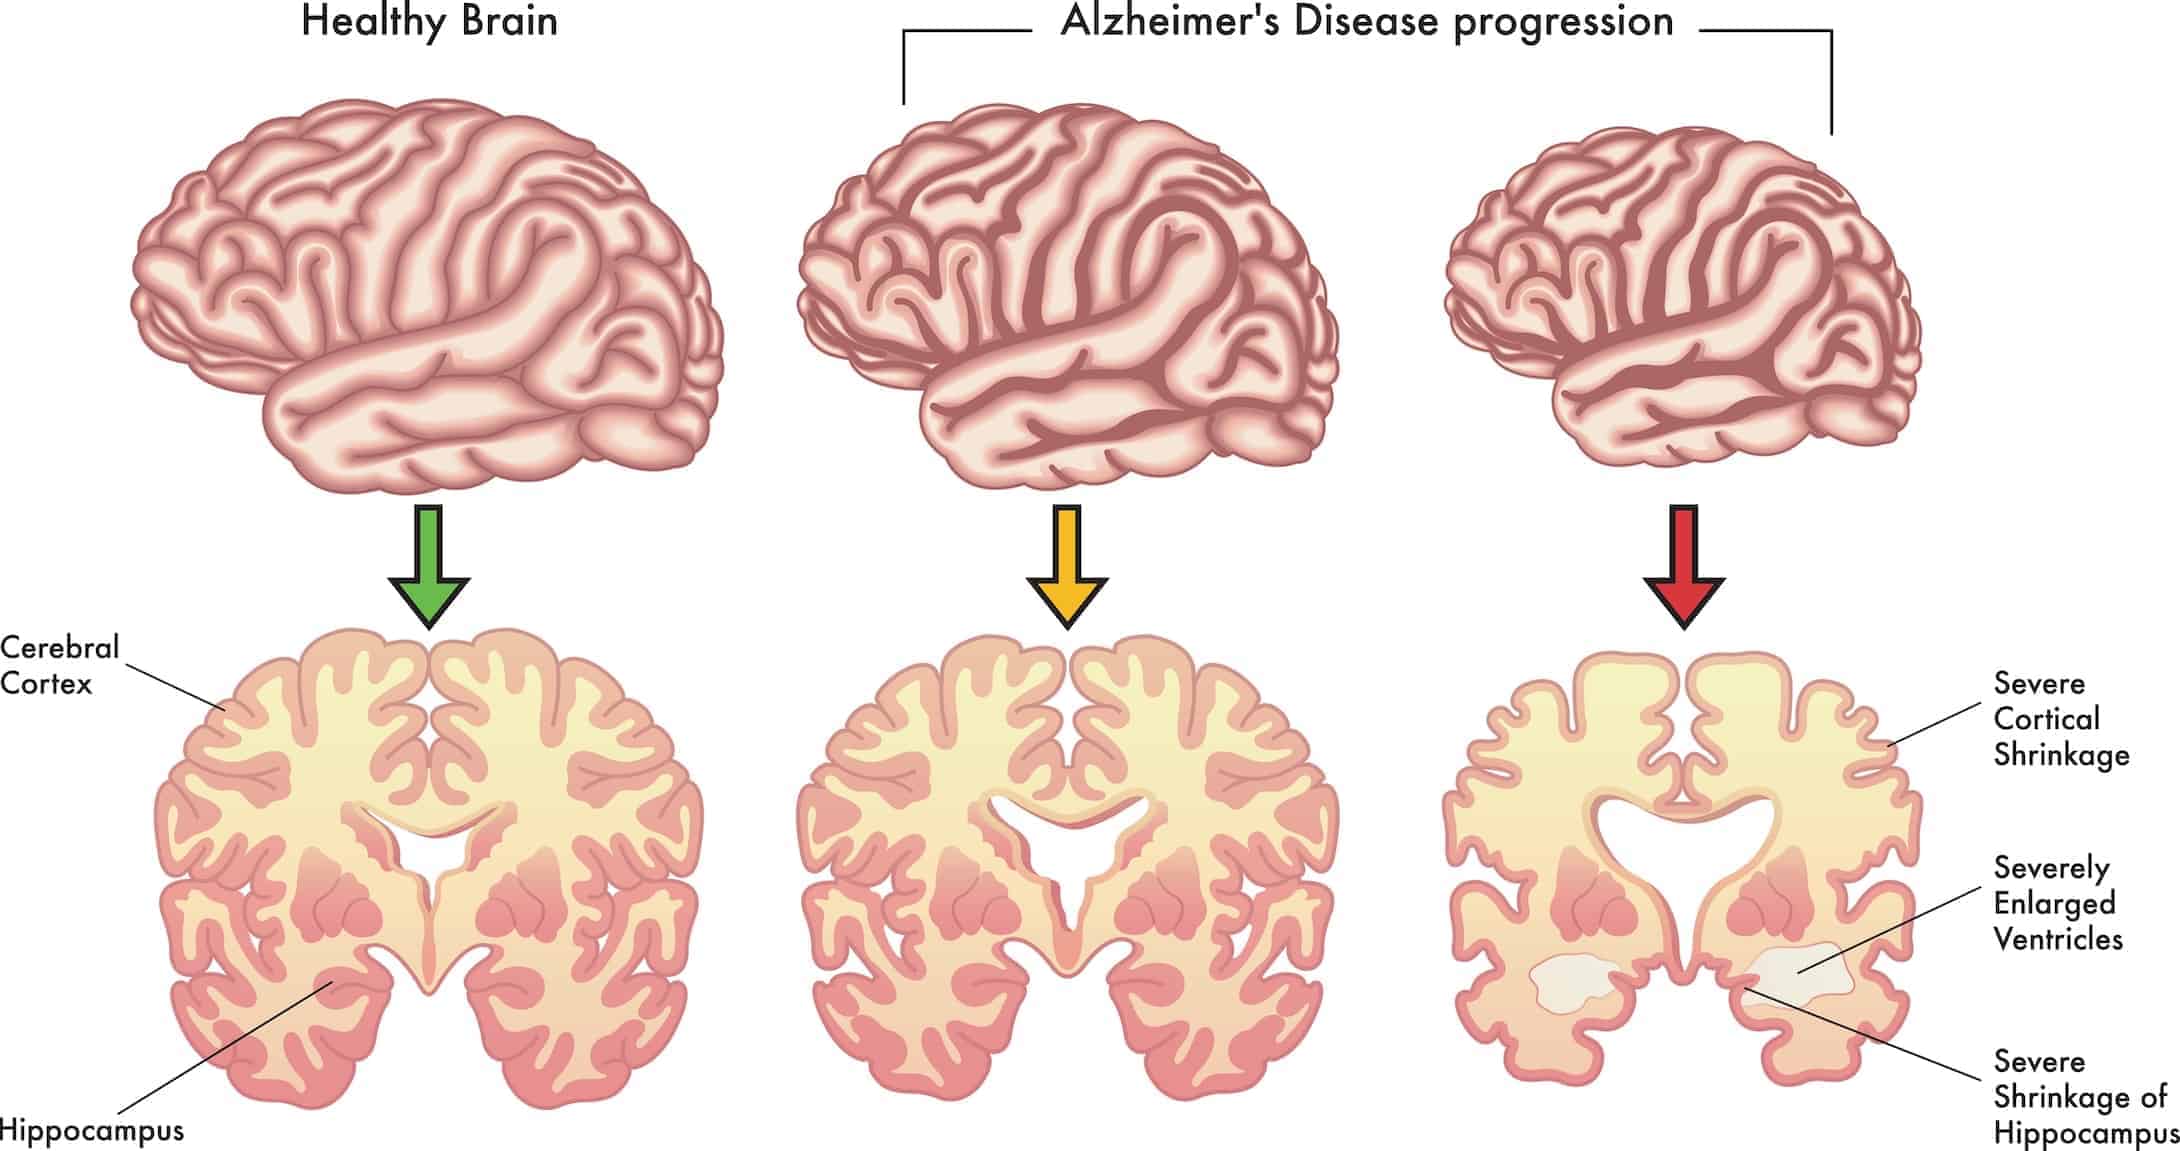 Understanding the Stages and Progression of Alzheimer’s Disease